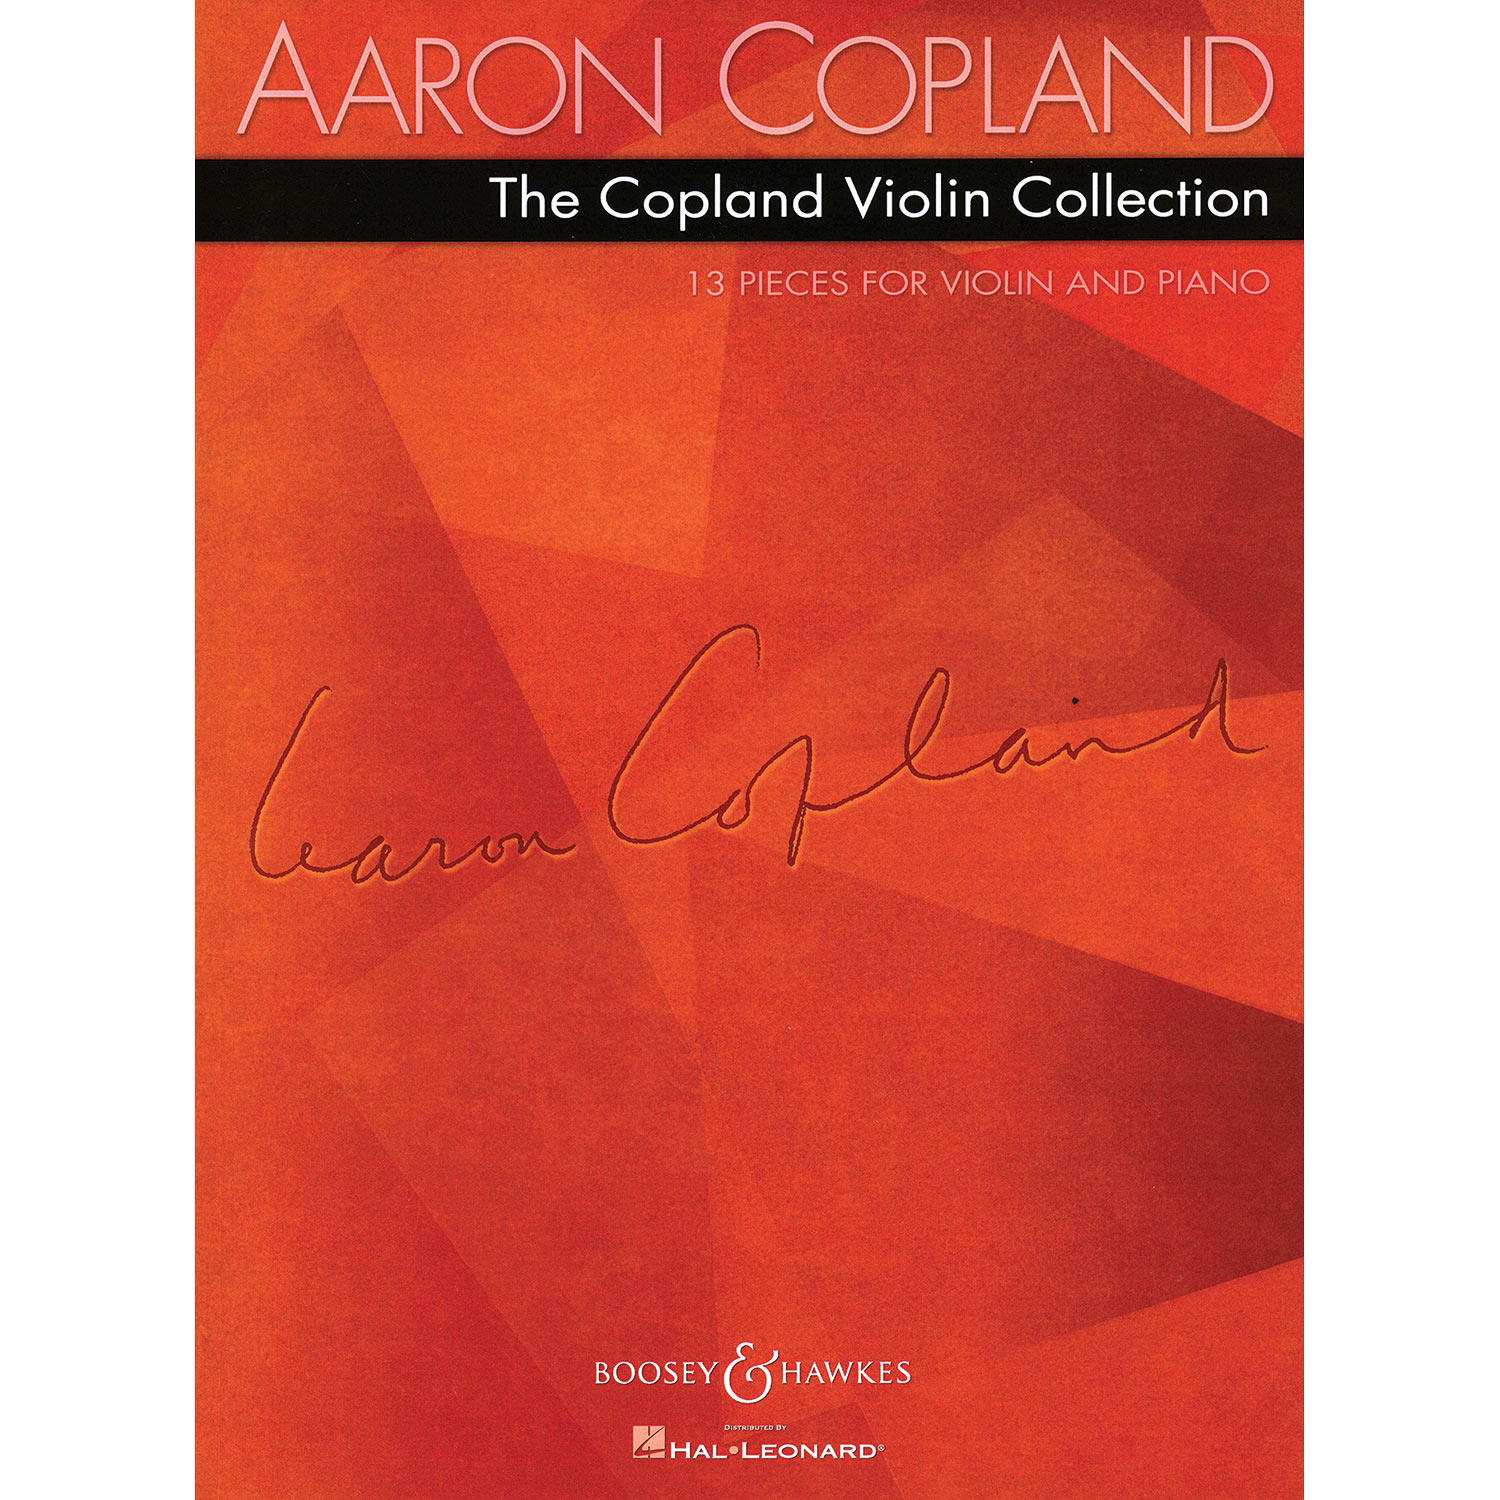 The Copland Violin Collection, with piano; Aaron Copland (Boosey & Hawkes)